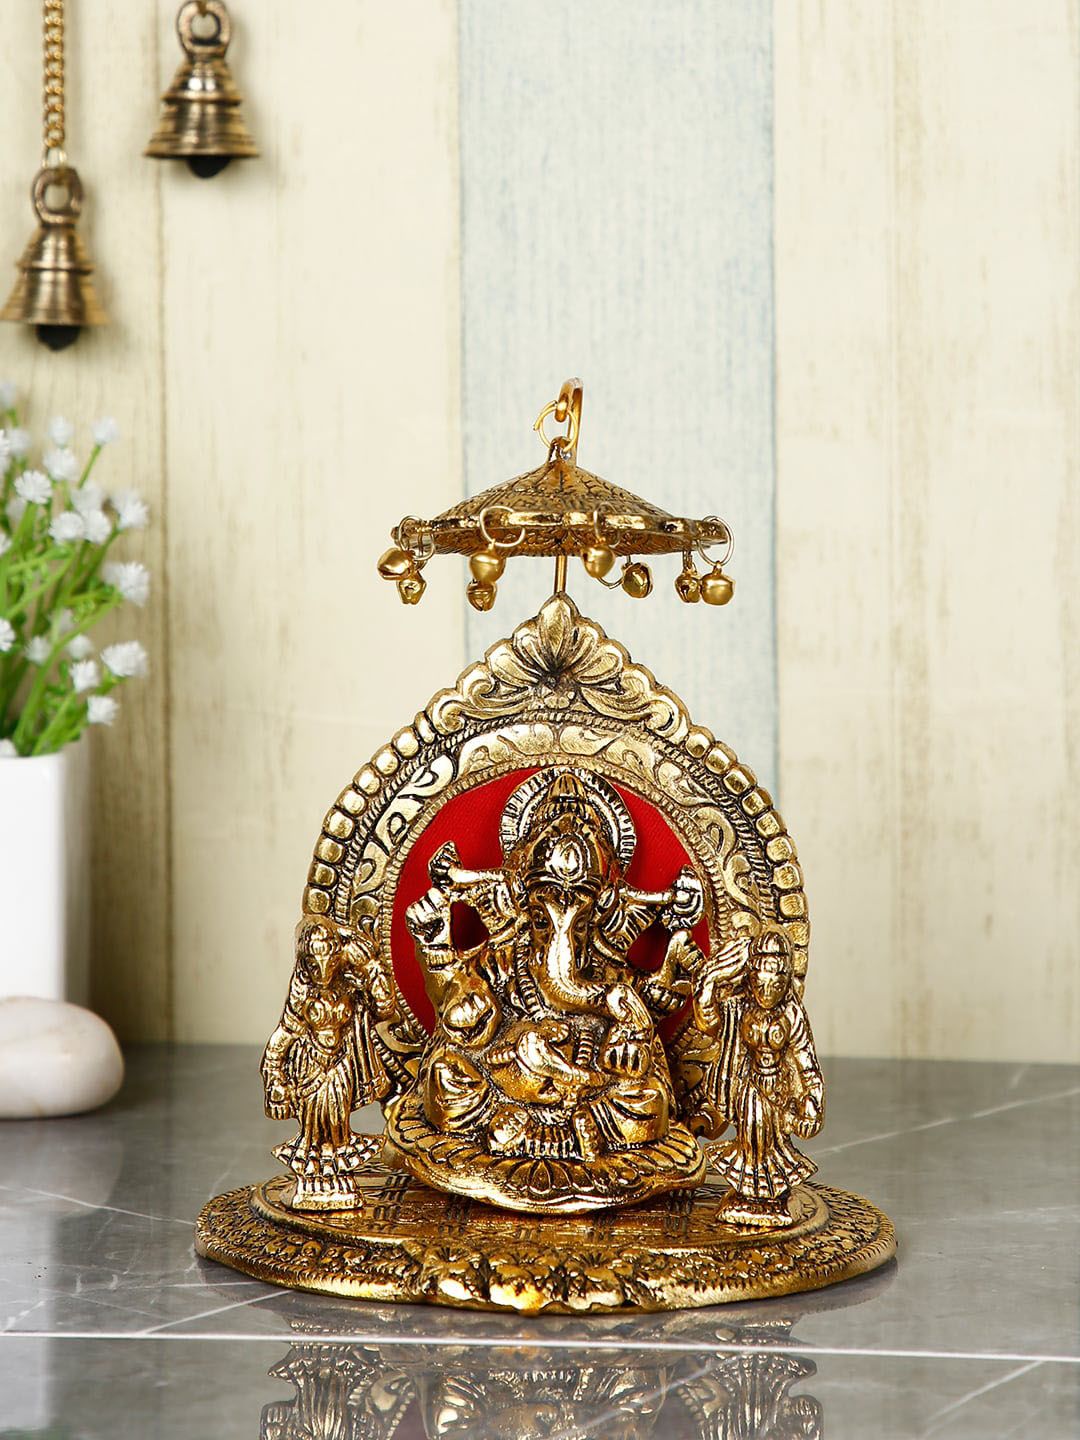 CraftVatika Gold-Toned & Red Handcrafted Lord Ganesha Riddhi Siddhi Chatra Statue Showpiece Price in India